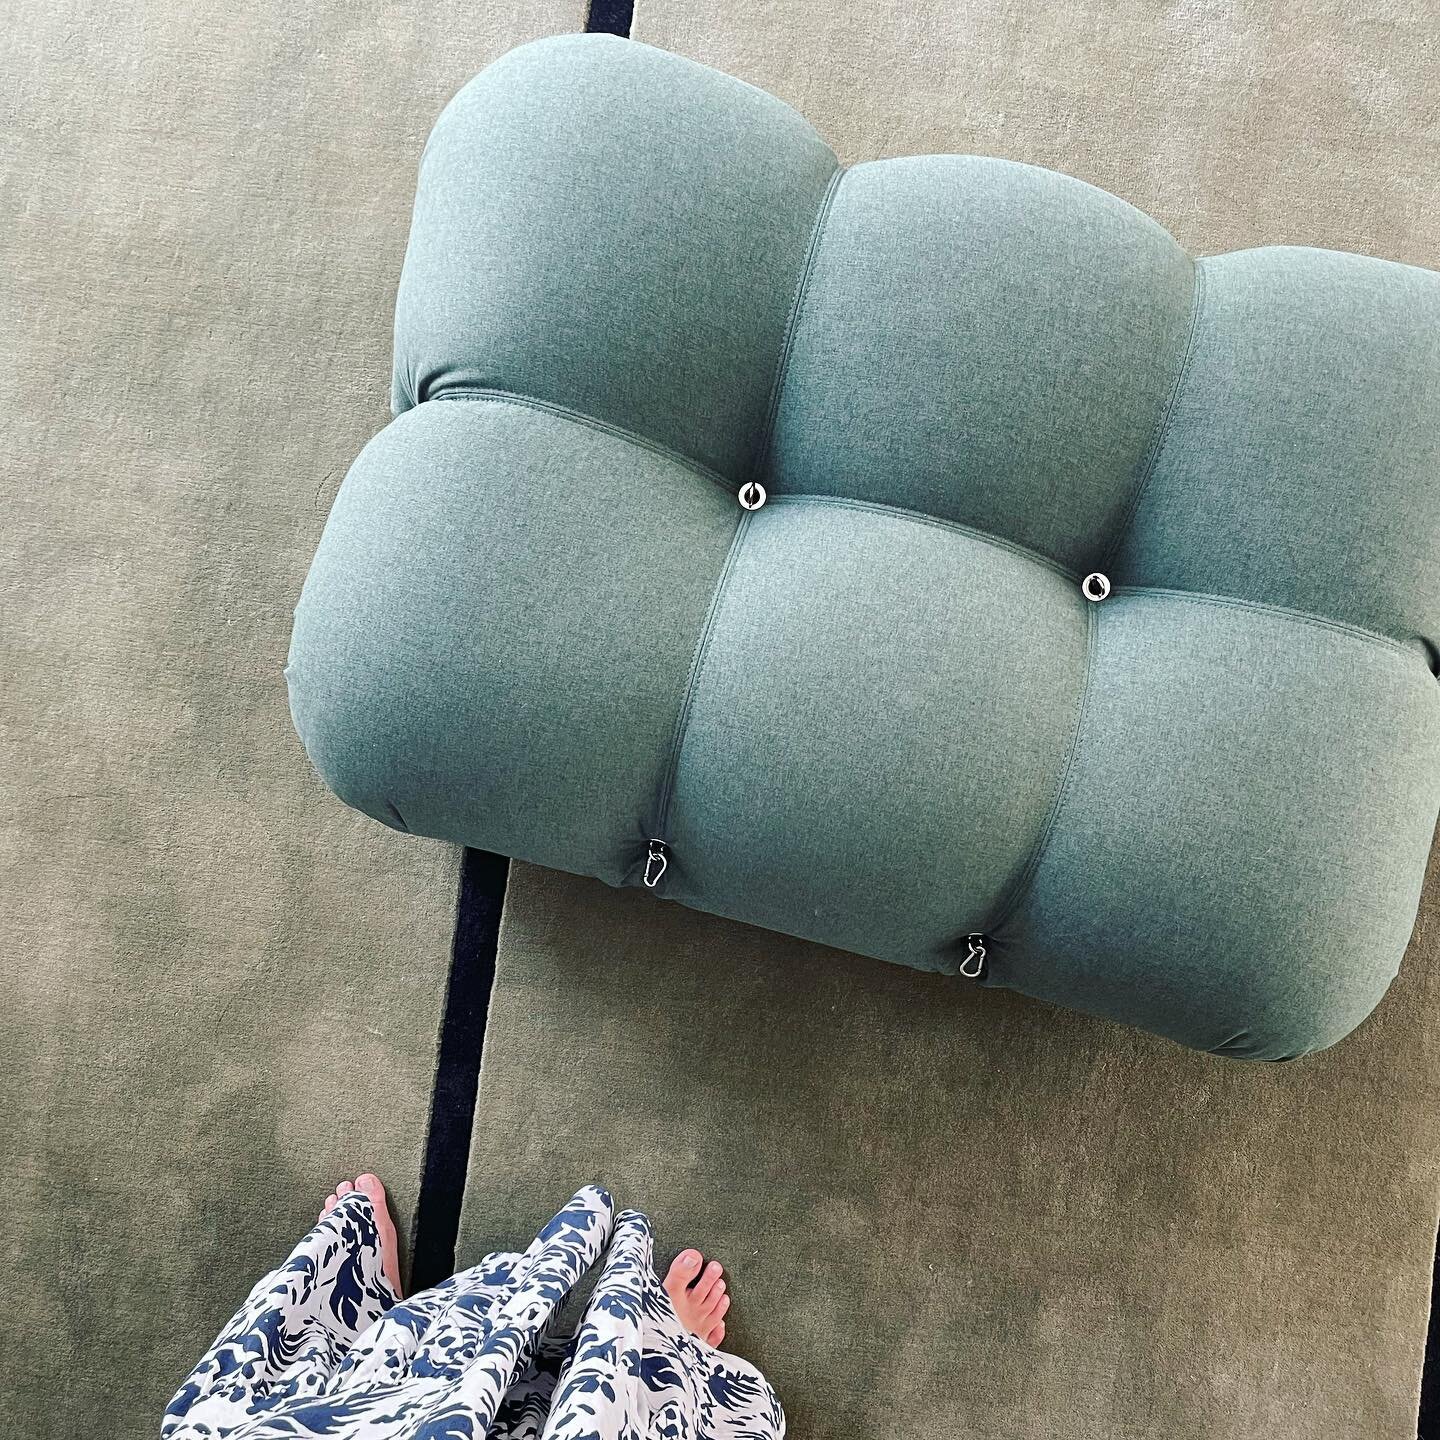 The Camaleonda Sofa by 1970&rsquo;s Italian designer Mario Bellini has landed in El Paso! Very special sofa for a very special client project. 🤌🤌🤌 .
.
.
.
.
.
.
.
.
.
.
.
.
#architecture #design #interior #interiordesign #interiorsrchitecture #cla